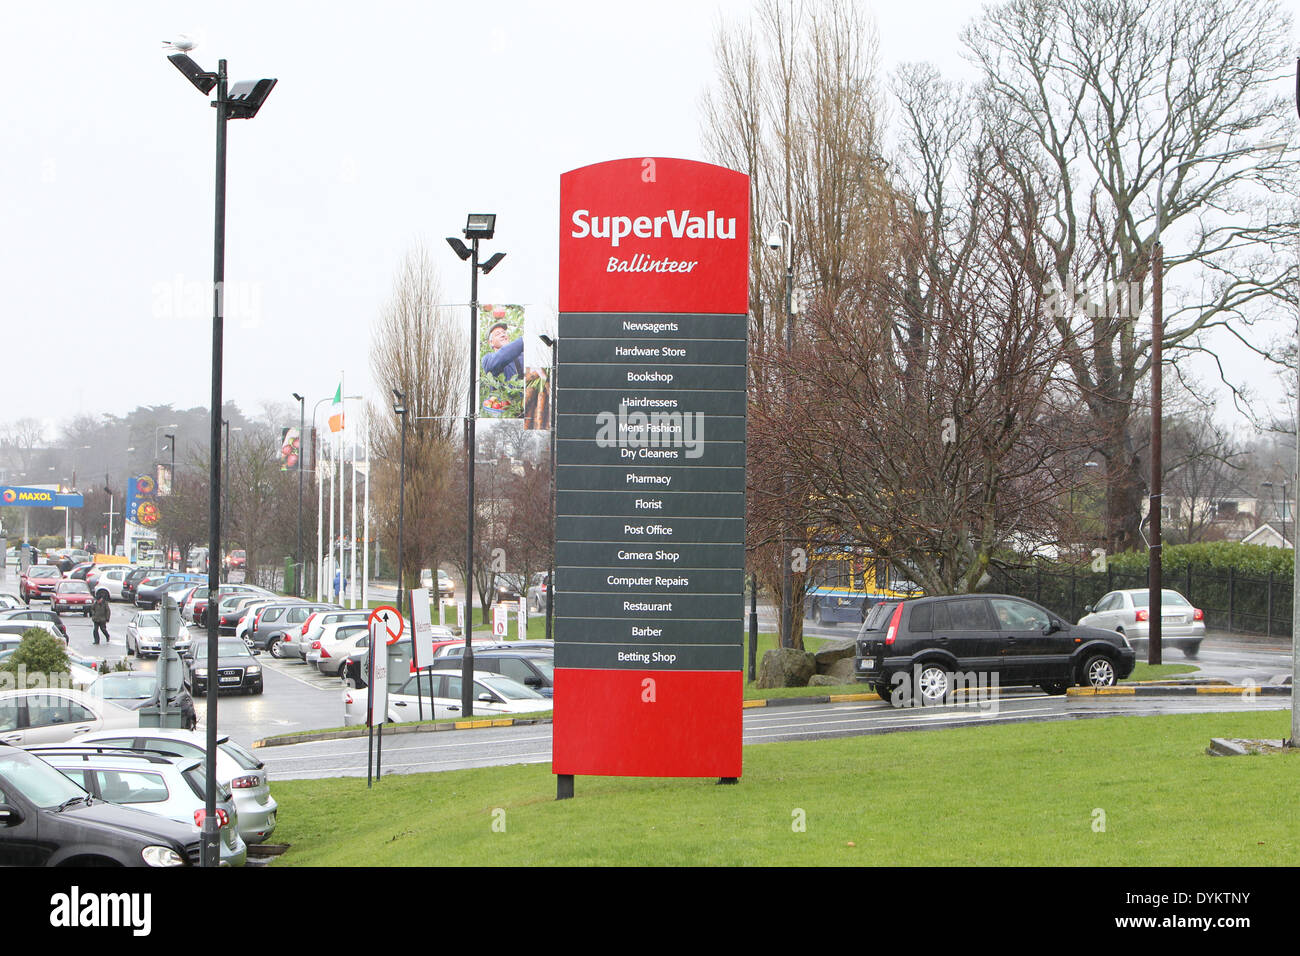 Image of a Supervalu sign at a SuperValu shopping centre in Ballinteer in South Dublin. Stock Photo